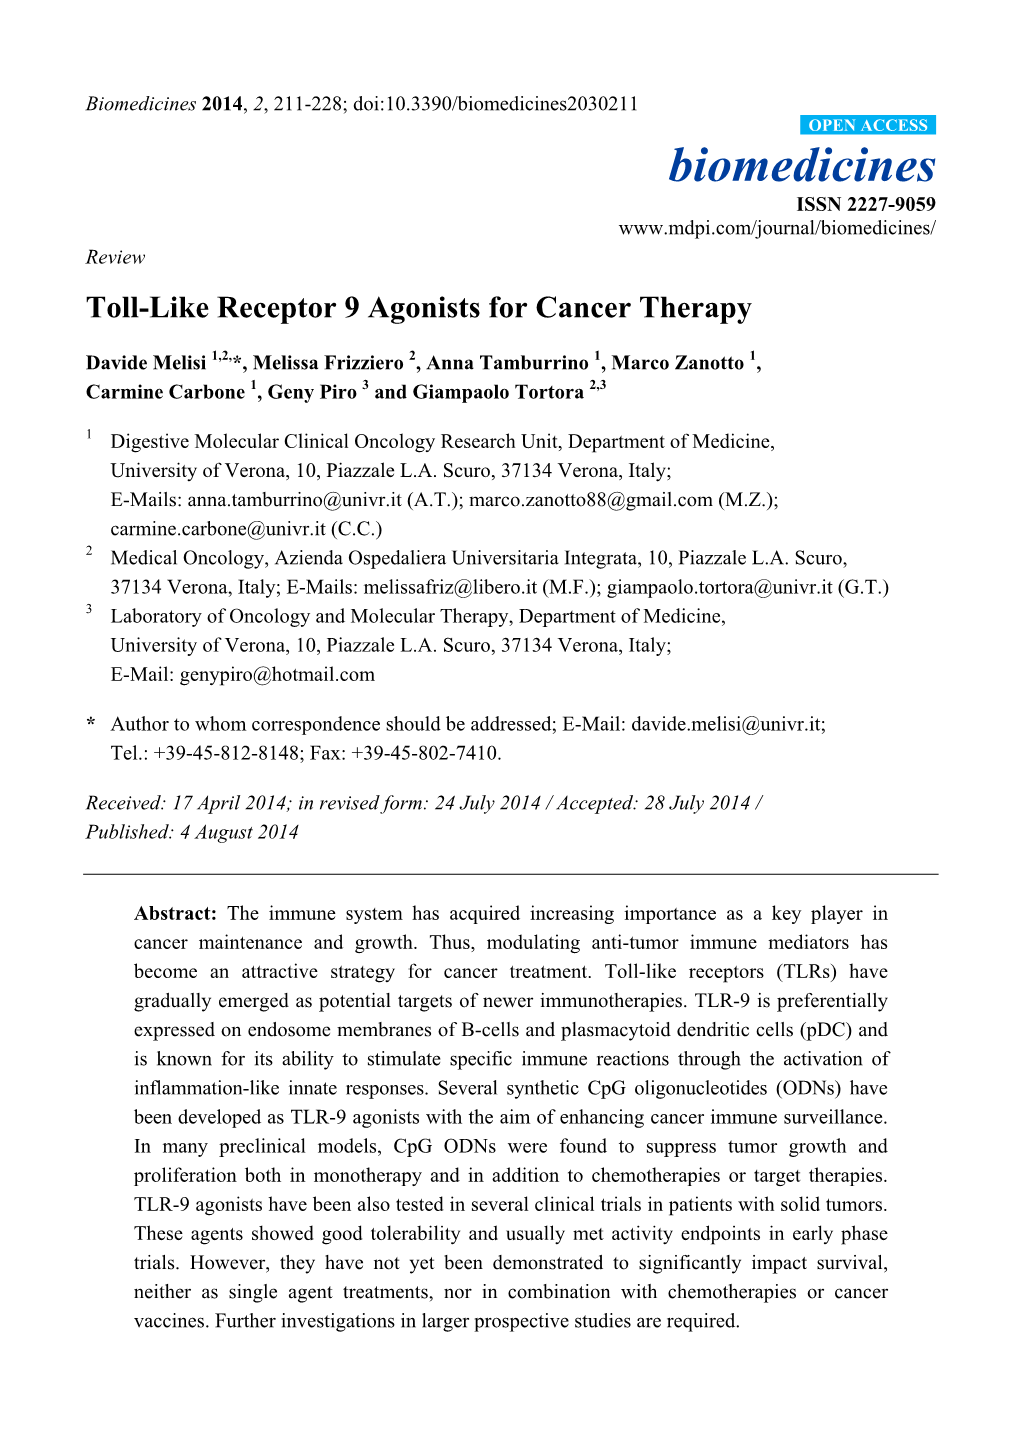 Toll-Like Receptor 9 Agonists for Cancer Therapy